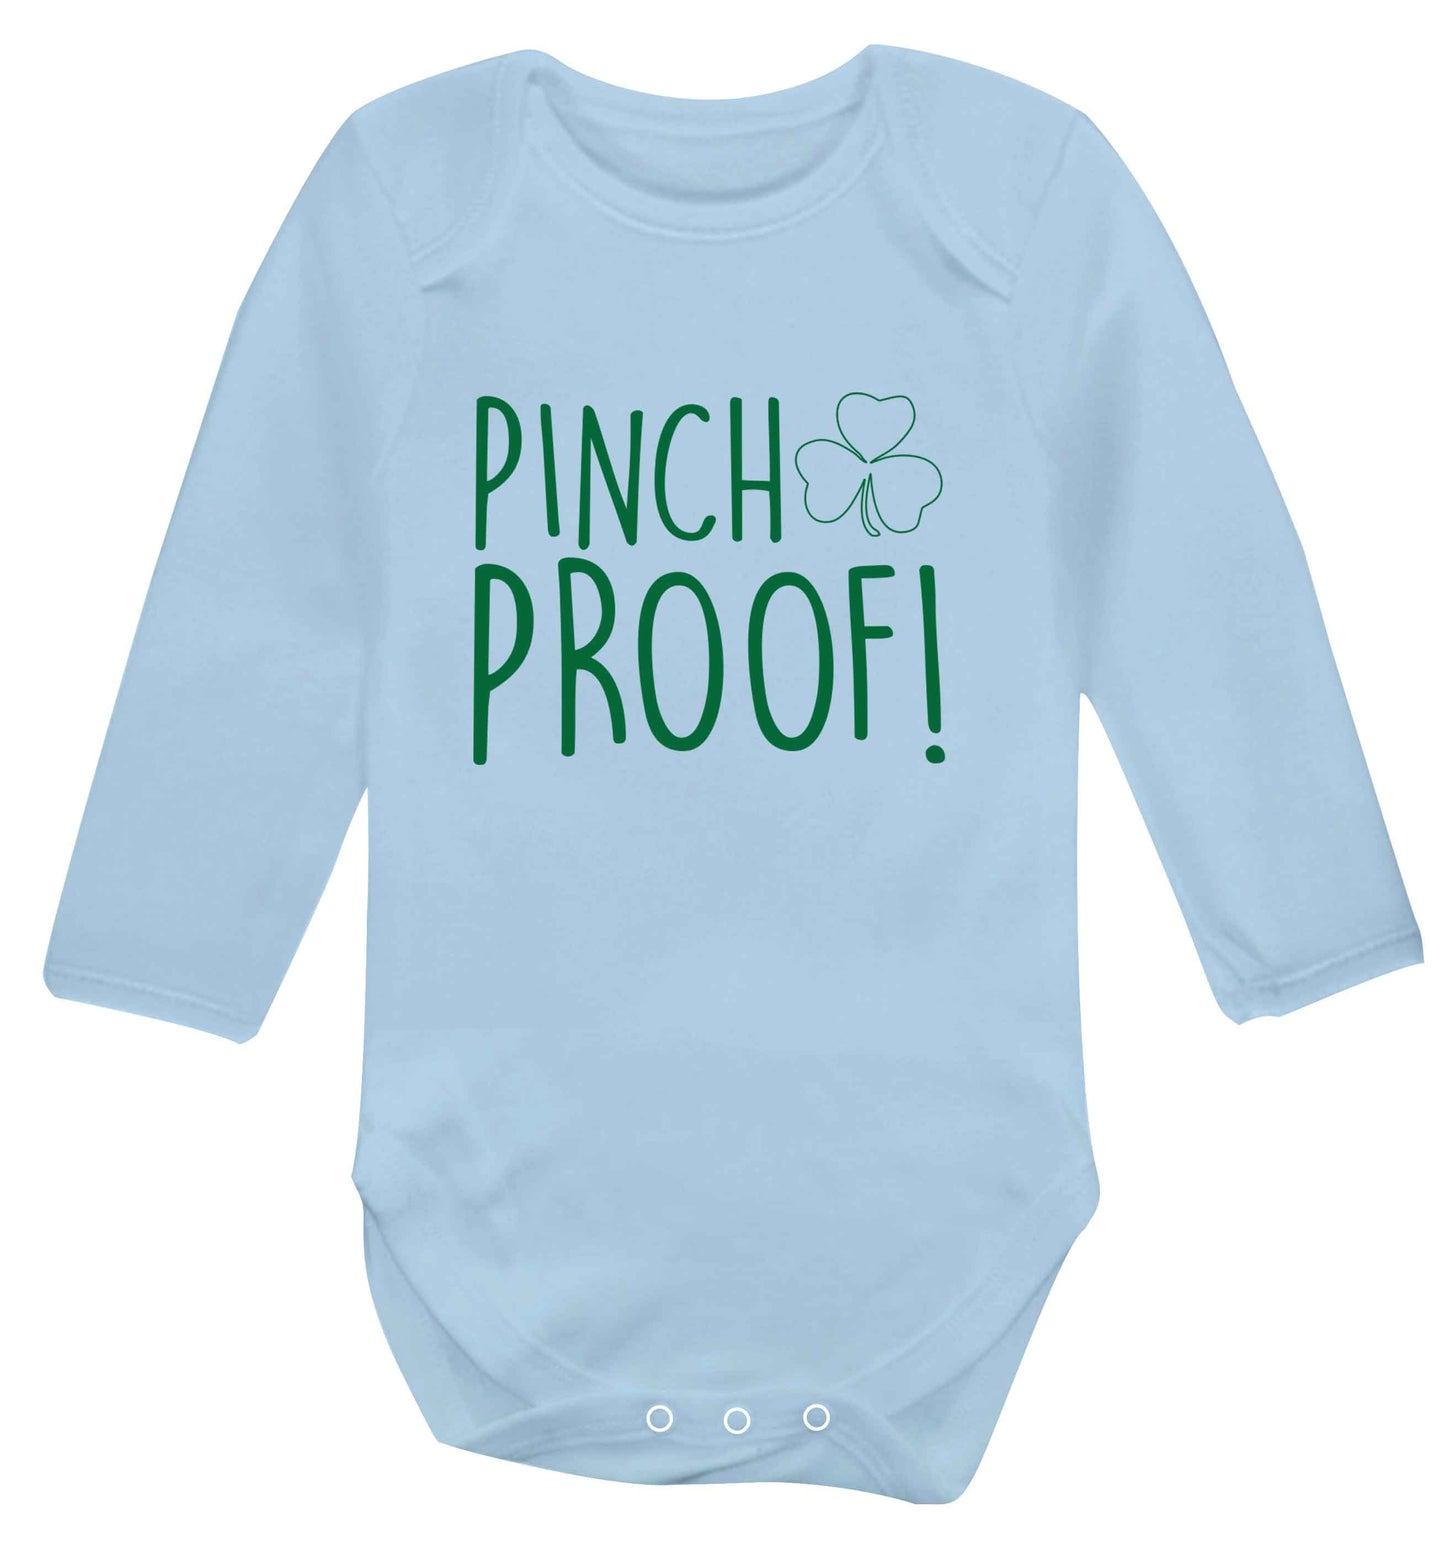 Pinch Proof baby vest long sleeved pale blue 6-12 months